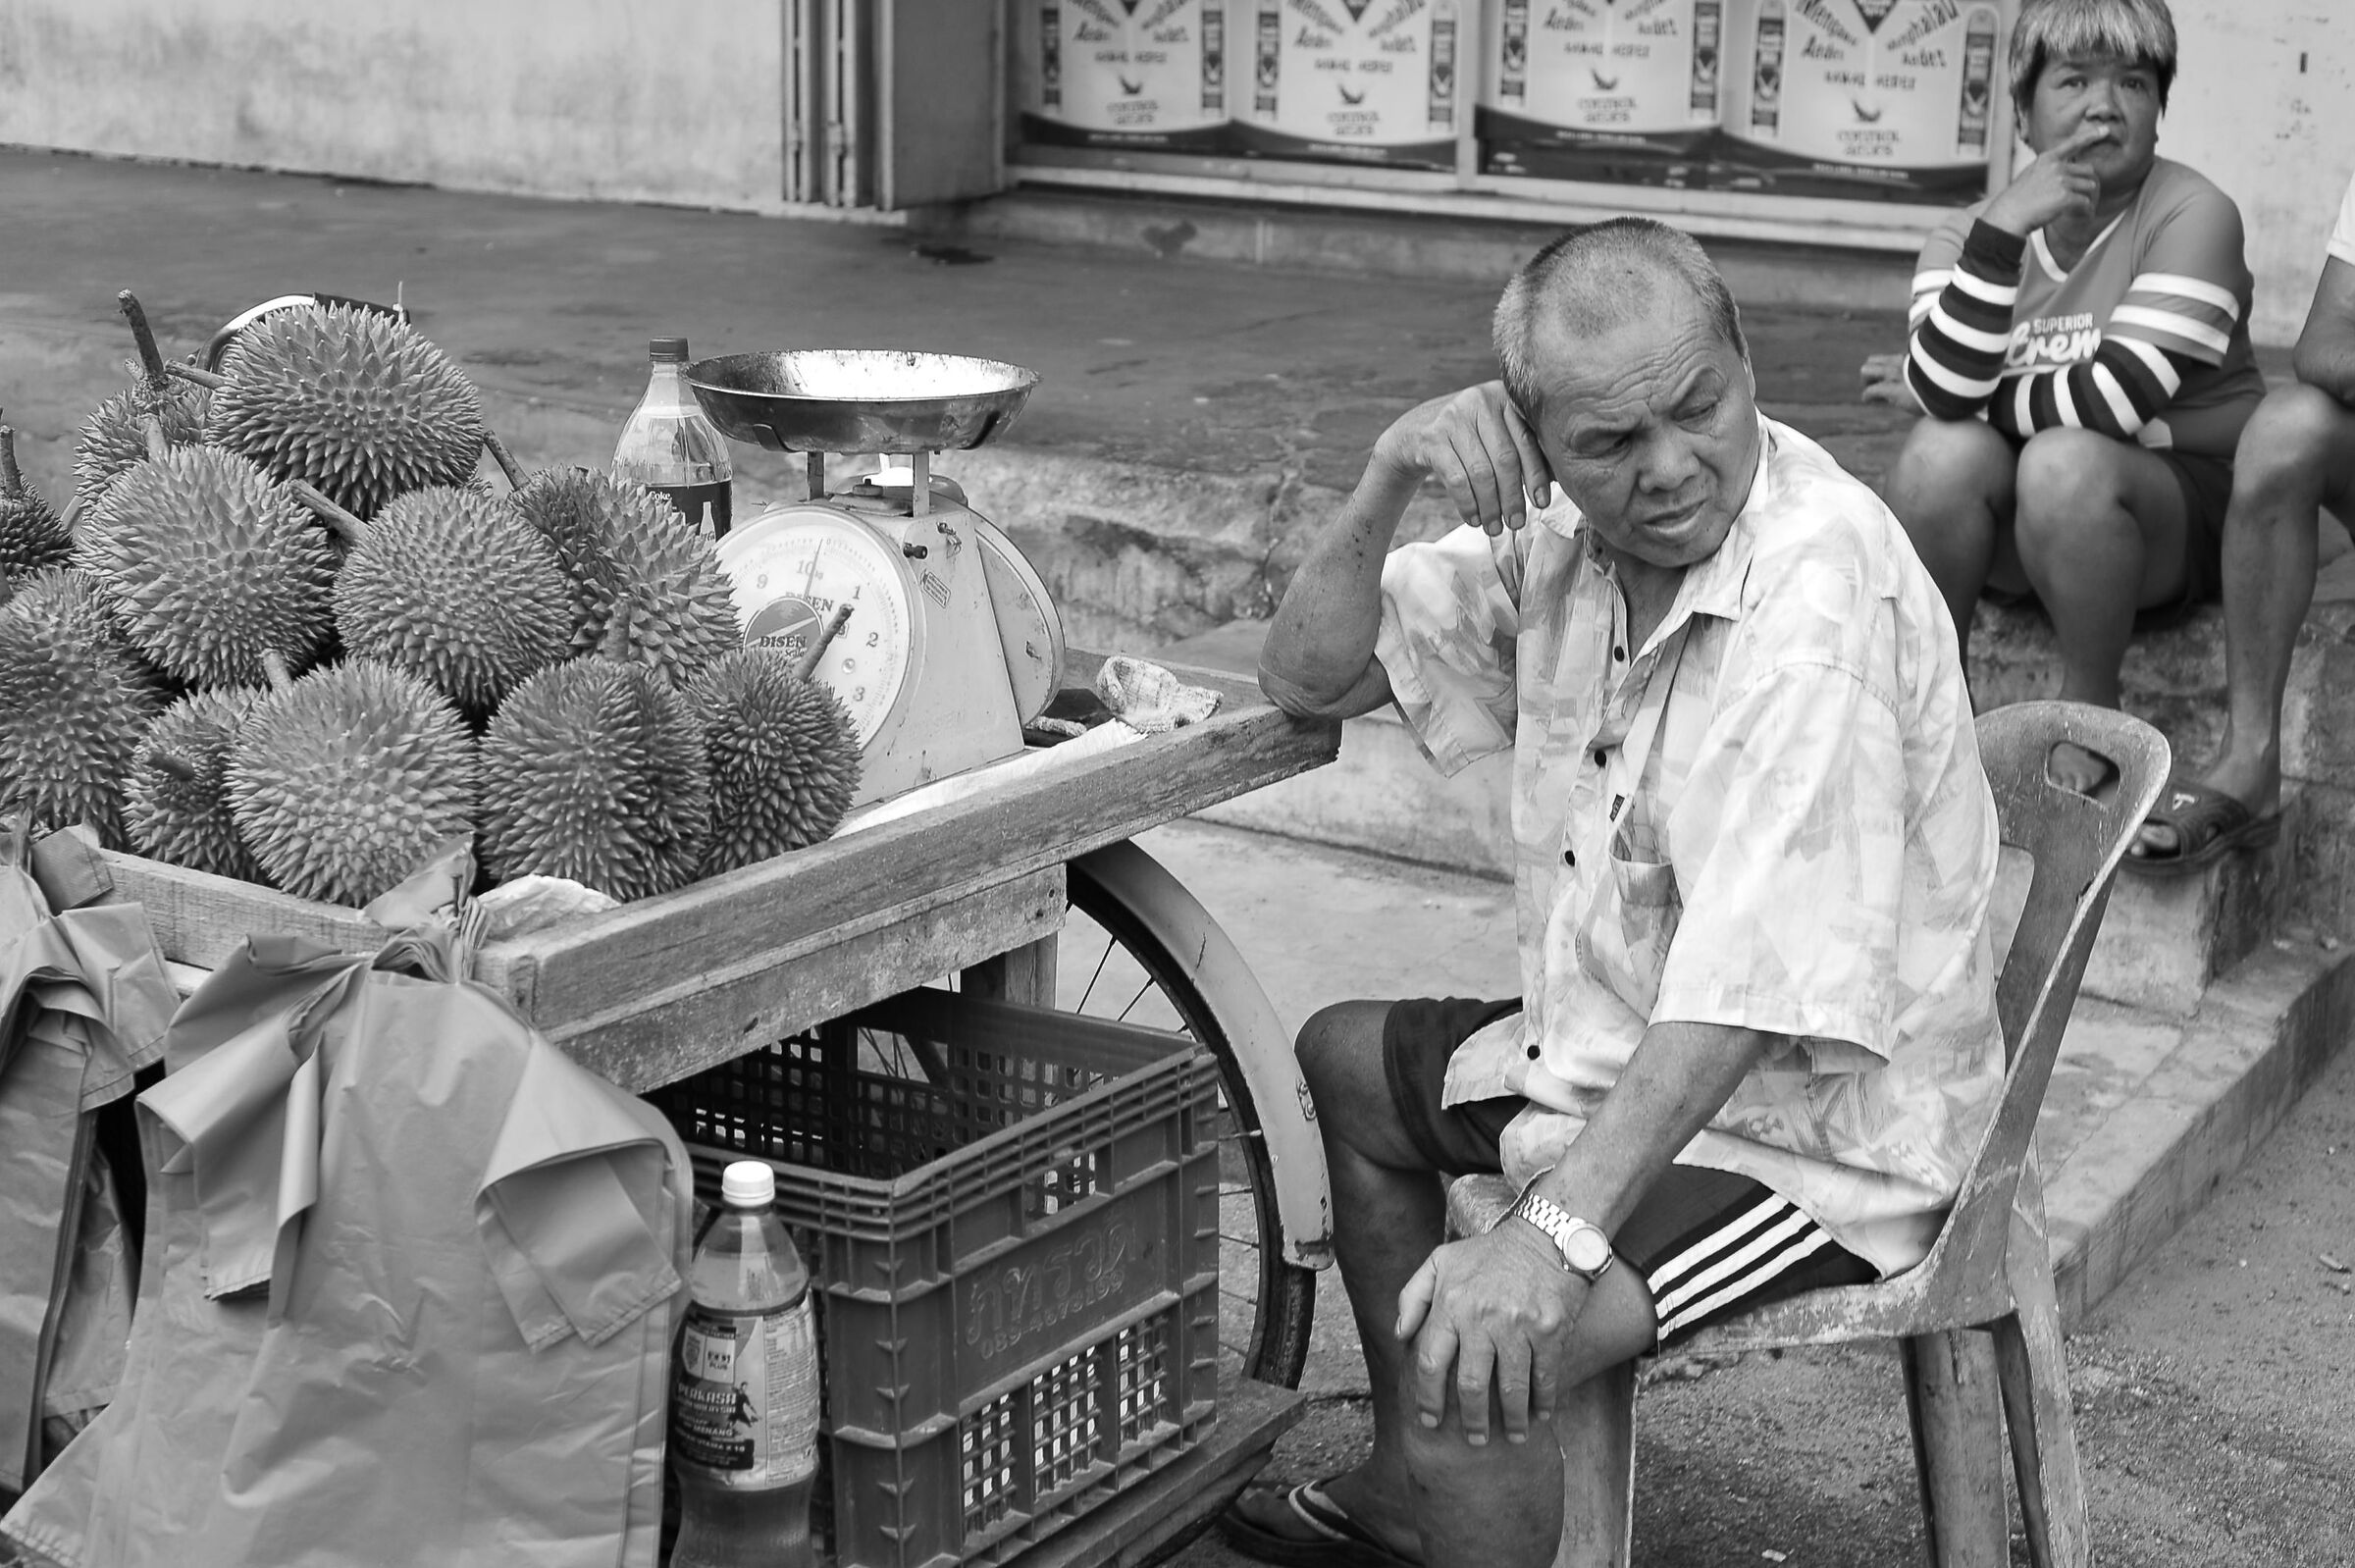 Man selling durians...